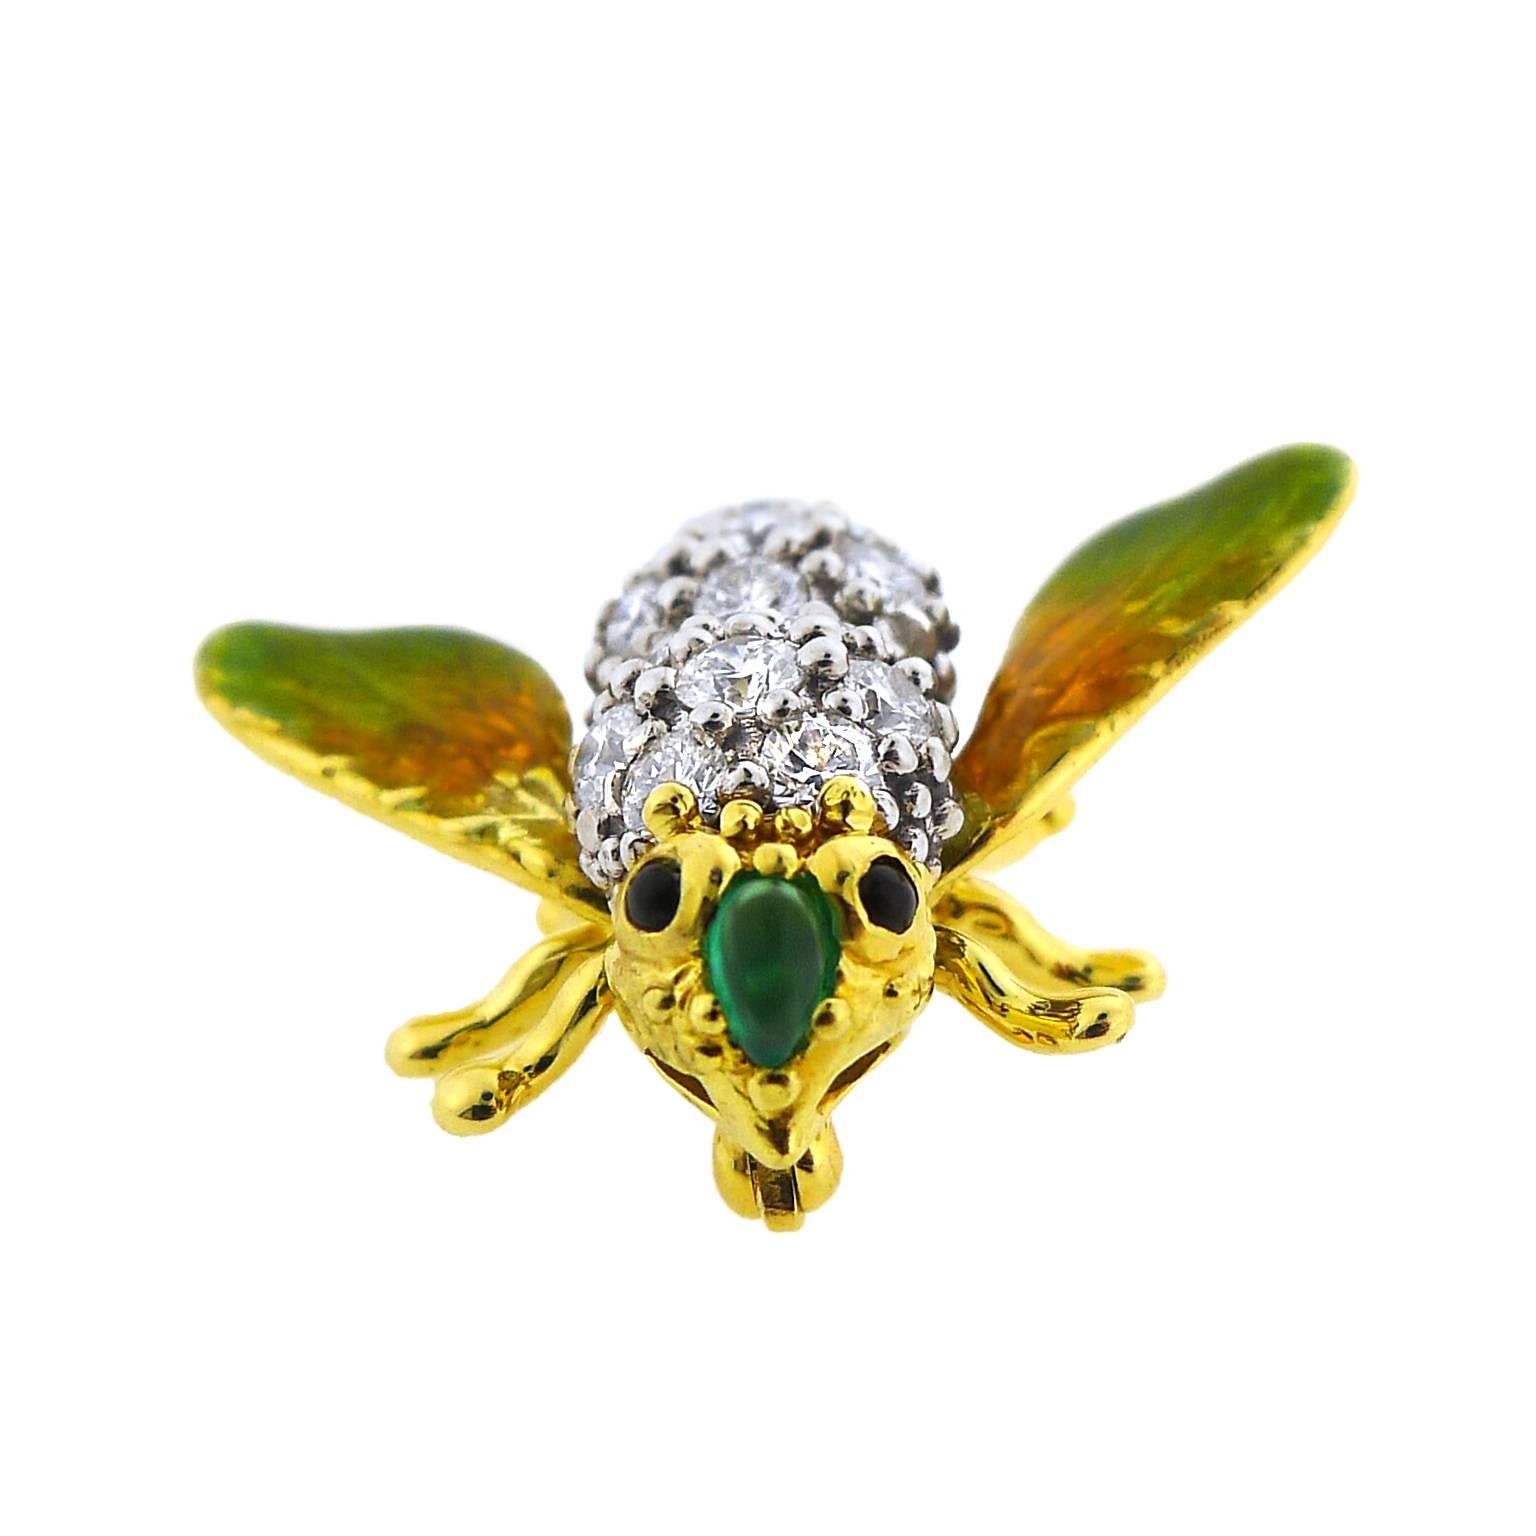 18 karat yellow and white gold bee pin with black onyx eyes and a cabochon emerald nose.  20 round brilliant cut diamonds total 1.15 carats and are F color and VS clarity.  Pin measures 1 1/8 inches across by 1 inch tall.  Original T. Foster &